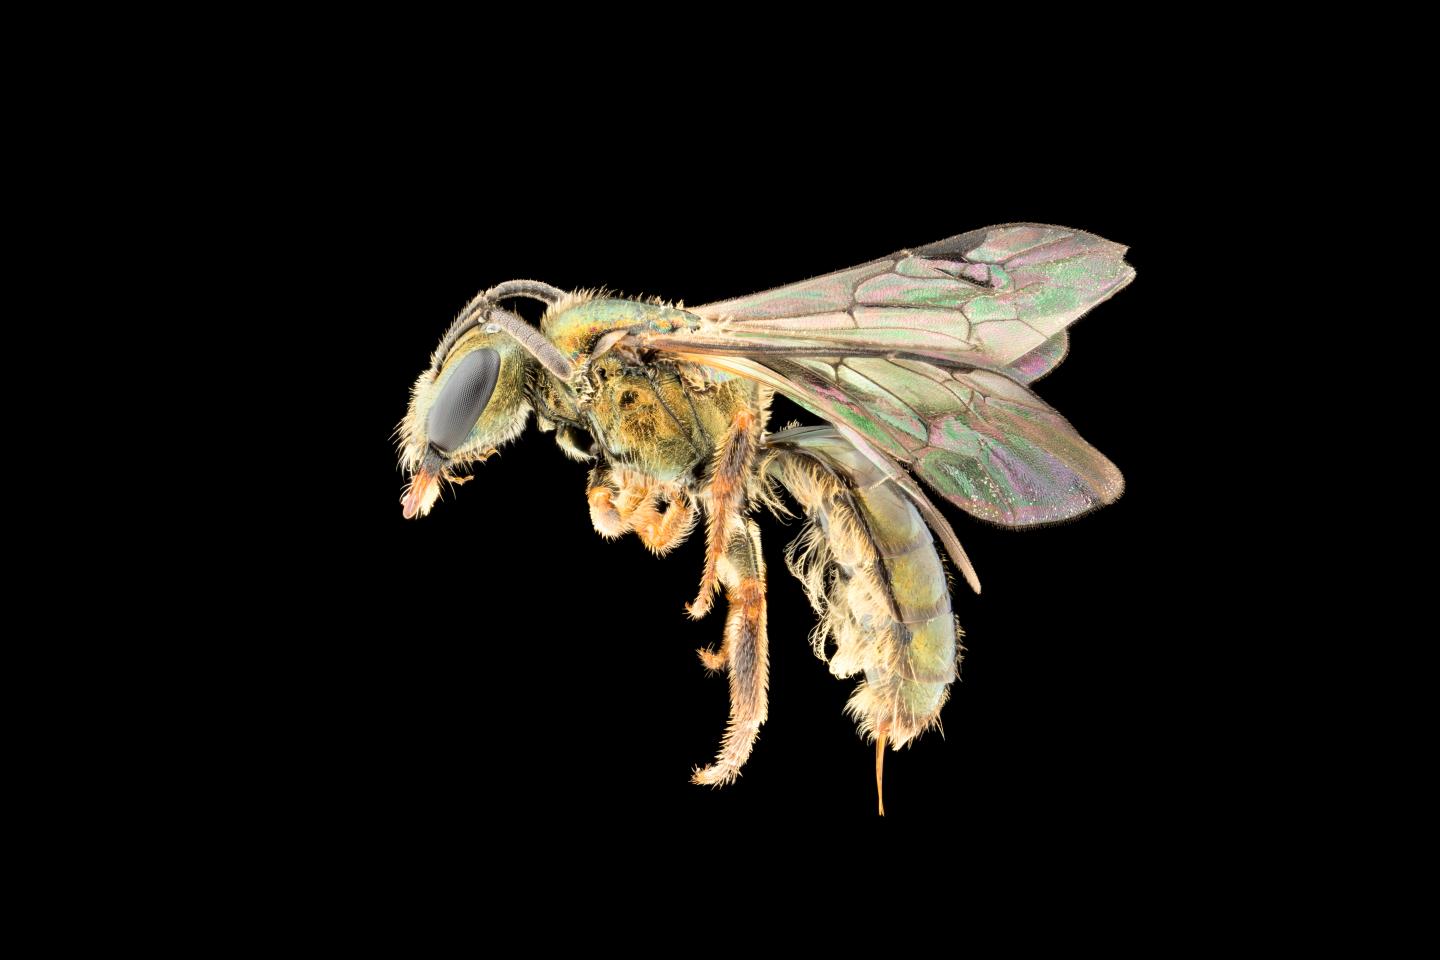 These newly discovered iridescent bees are already at risk of extinction